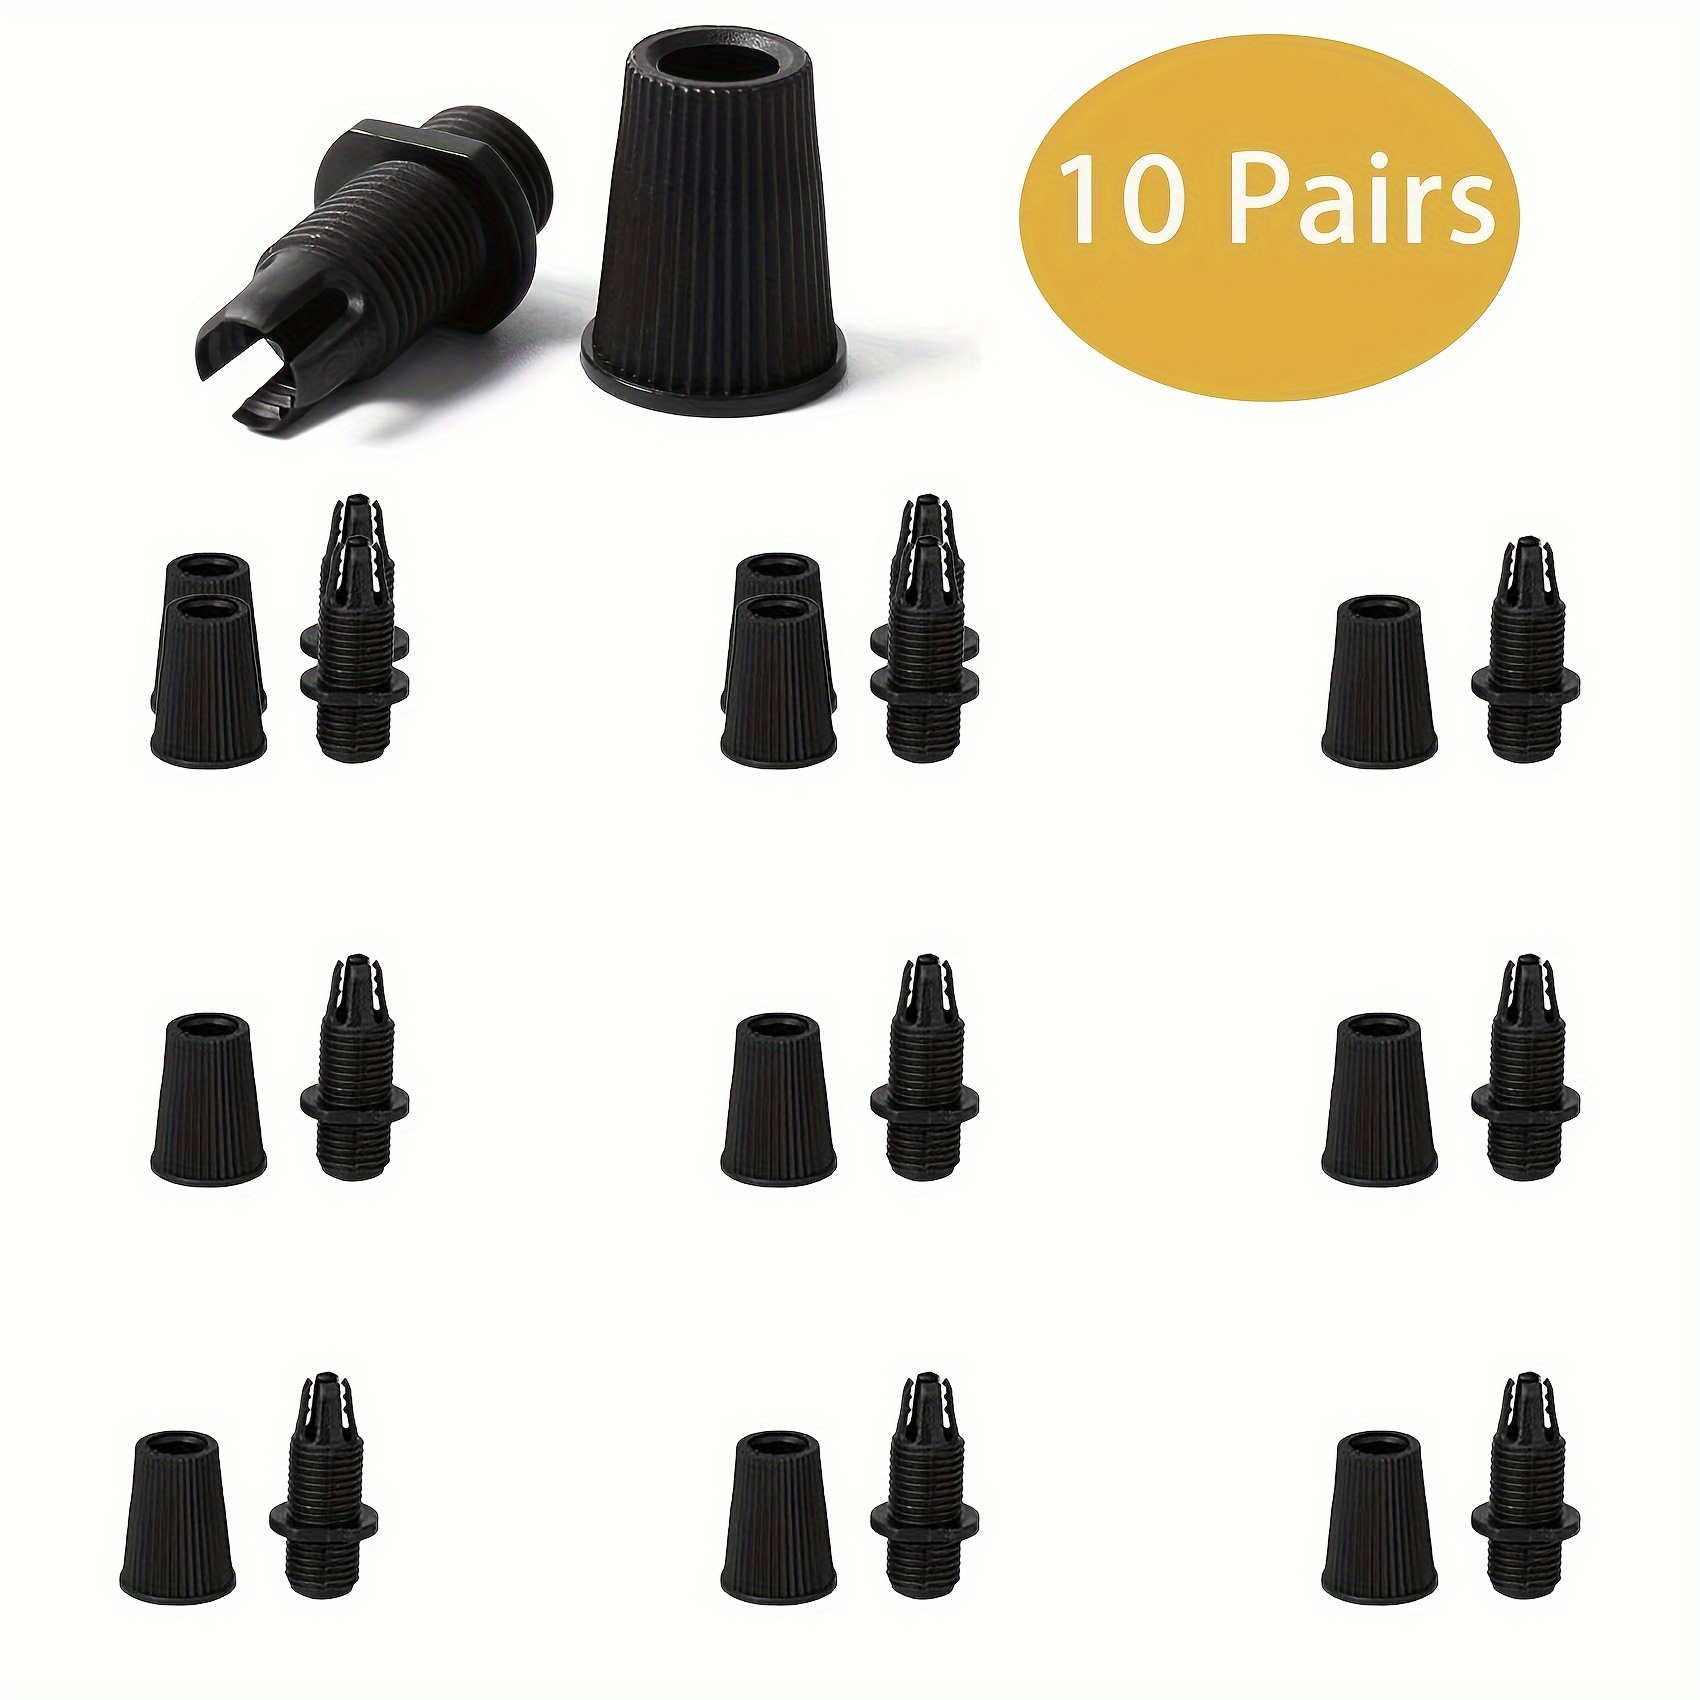 100PCS strain relief cable gland electrical cord grip connector Strain